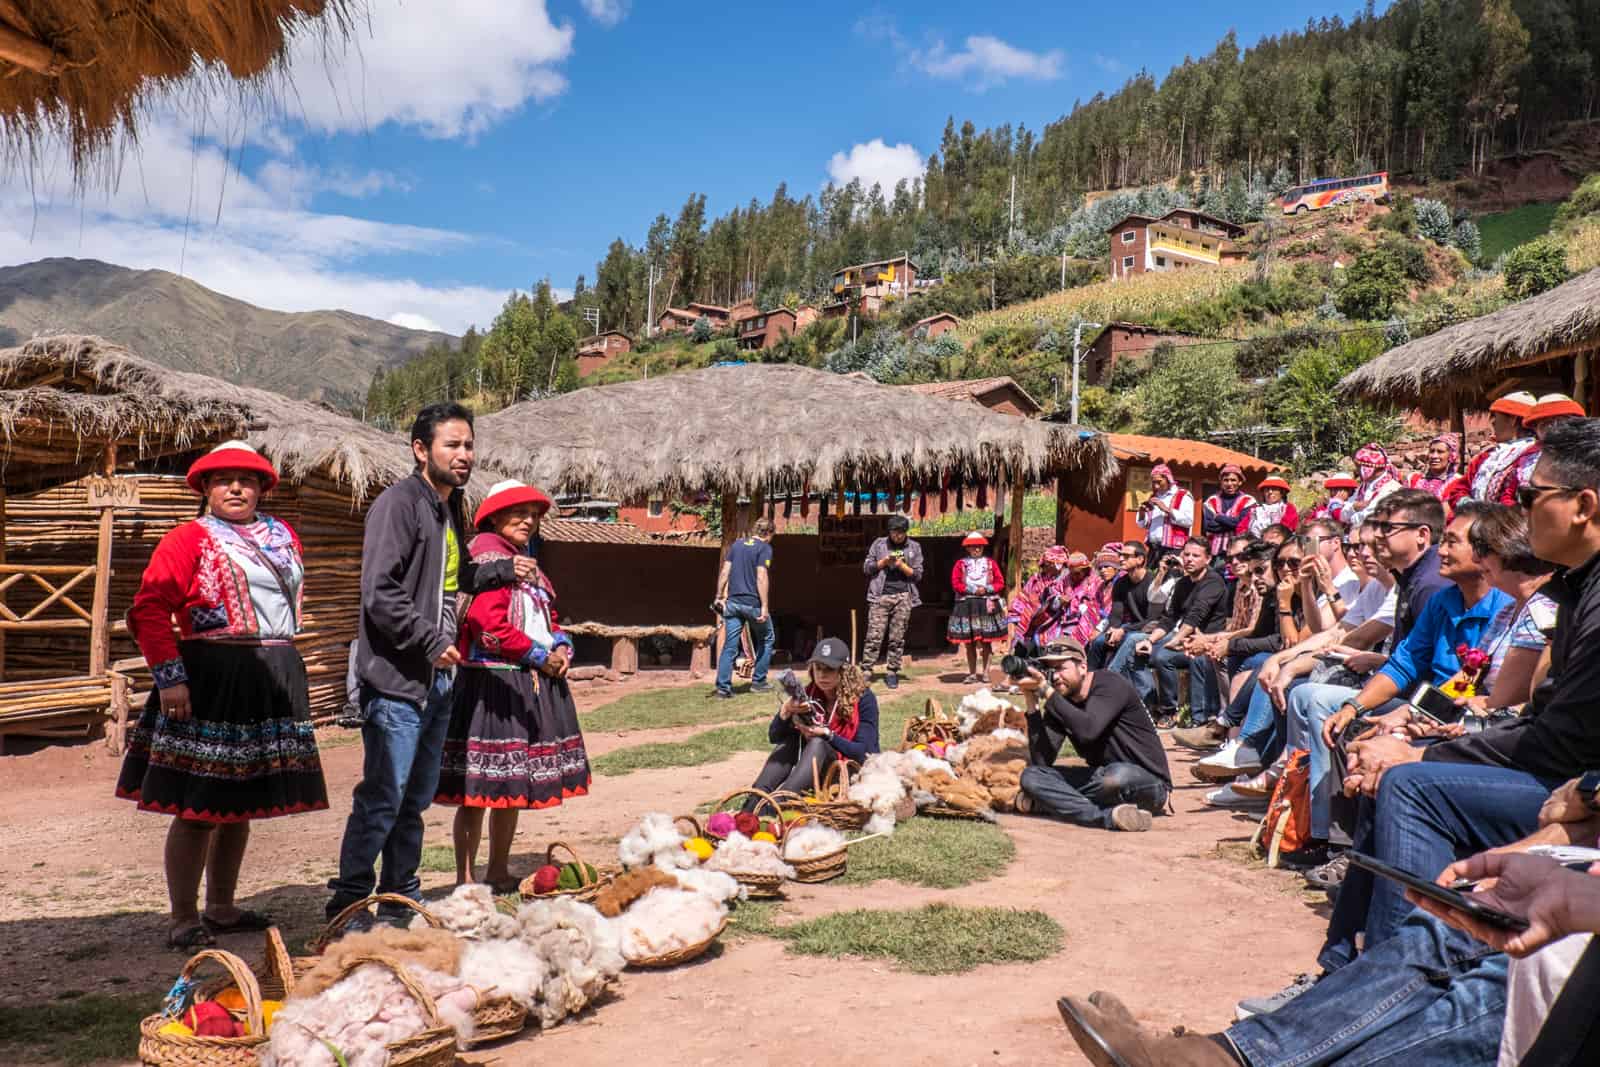 A Peru tour group visiting the village of the Ccaccaccollo Women’s Weaving Co-op in the Sacred Valley, Peru. 